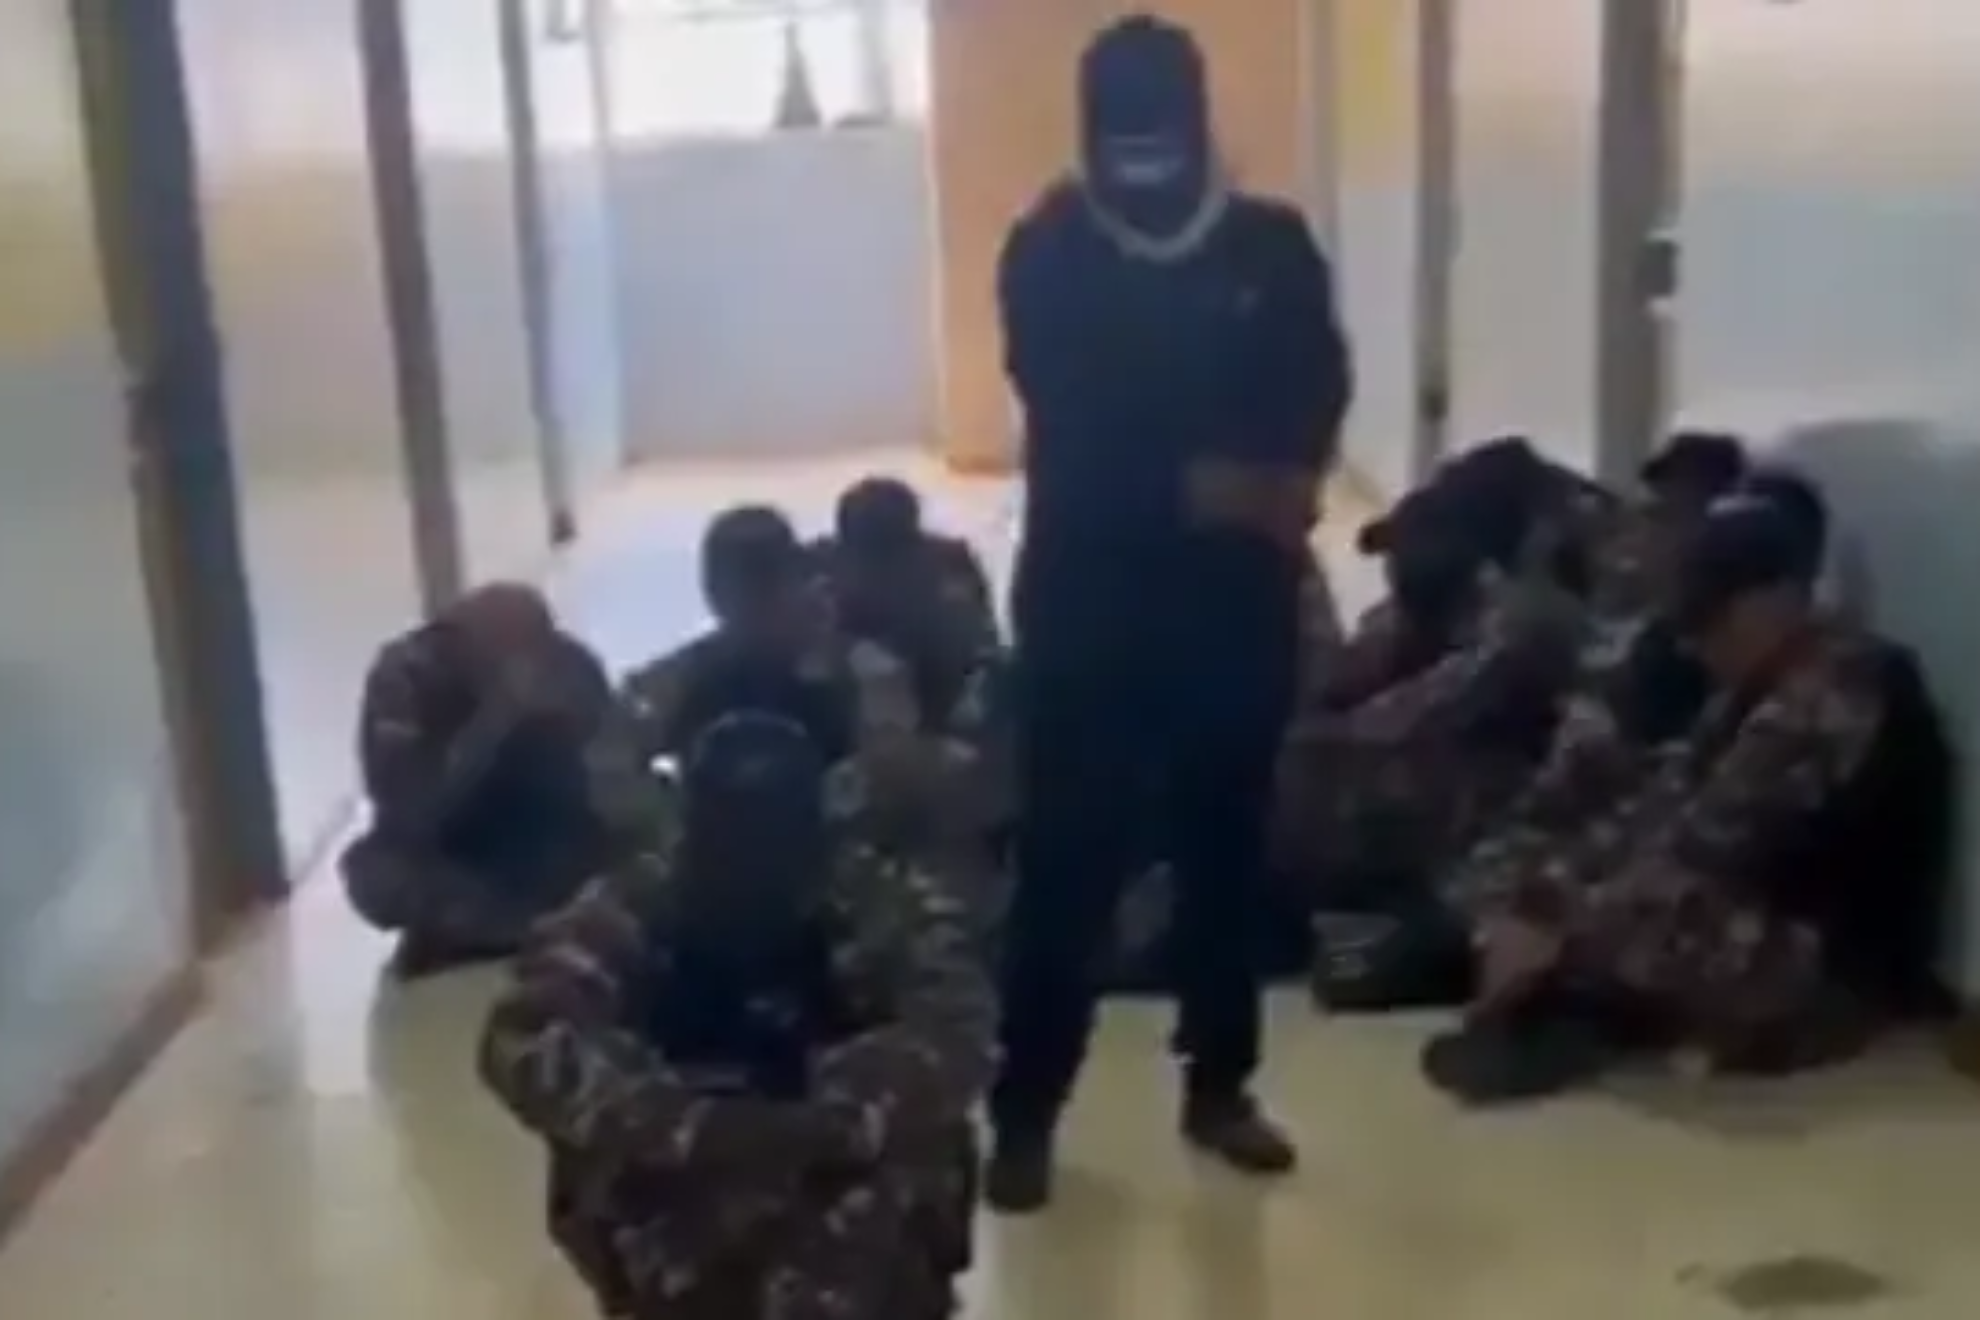 Graphic footage: Shocking cold-blooded execution of prison officer by gang members in Ecuador